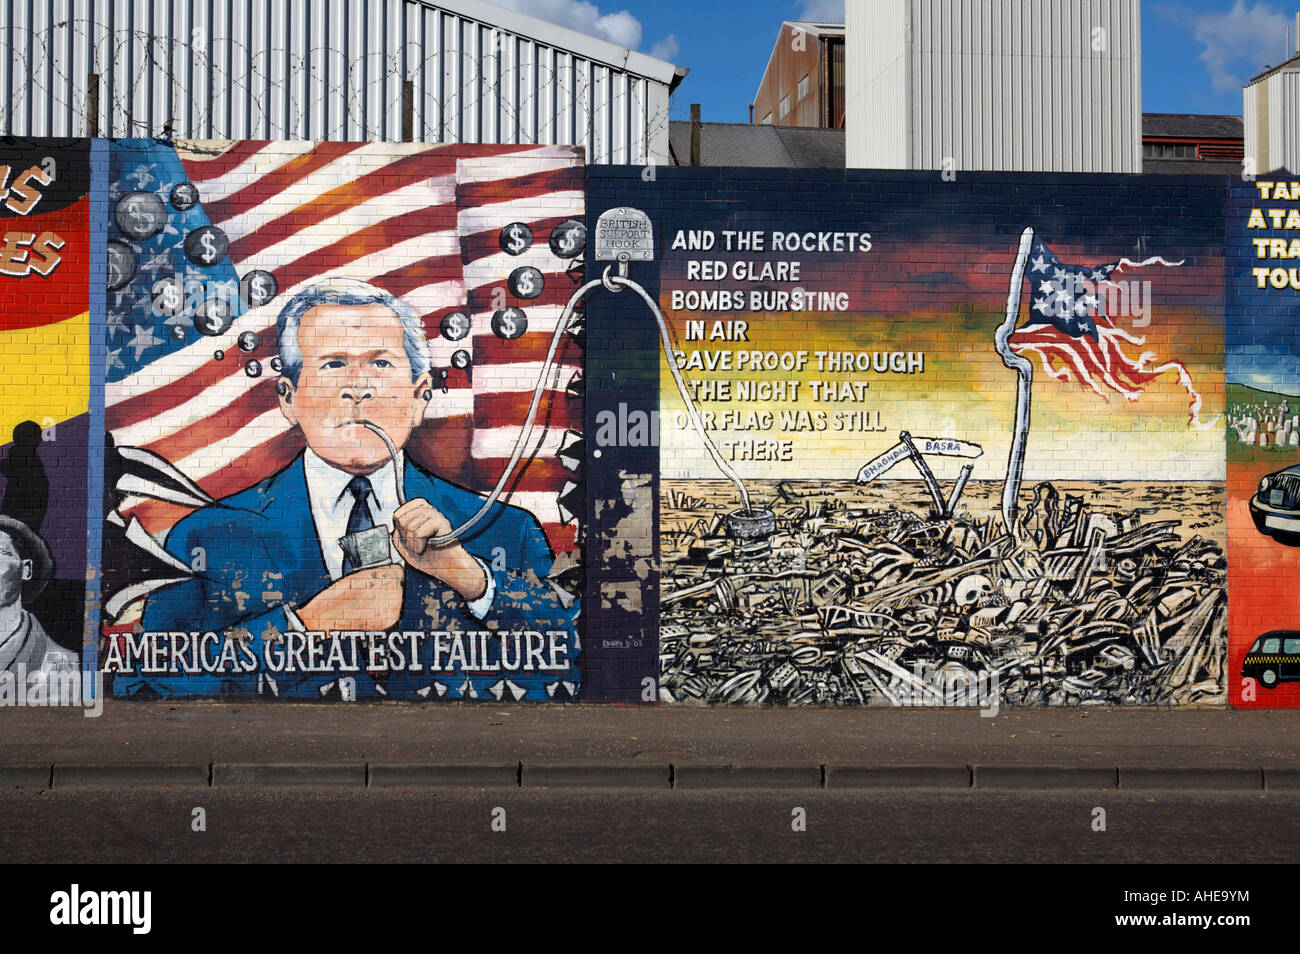 International wall murals in the republican falls road area of west belfast Northern Ireland . This mural is an anti George Bush Stock Photo